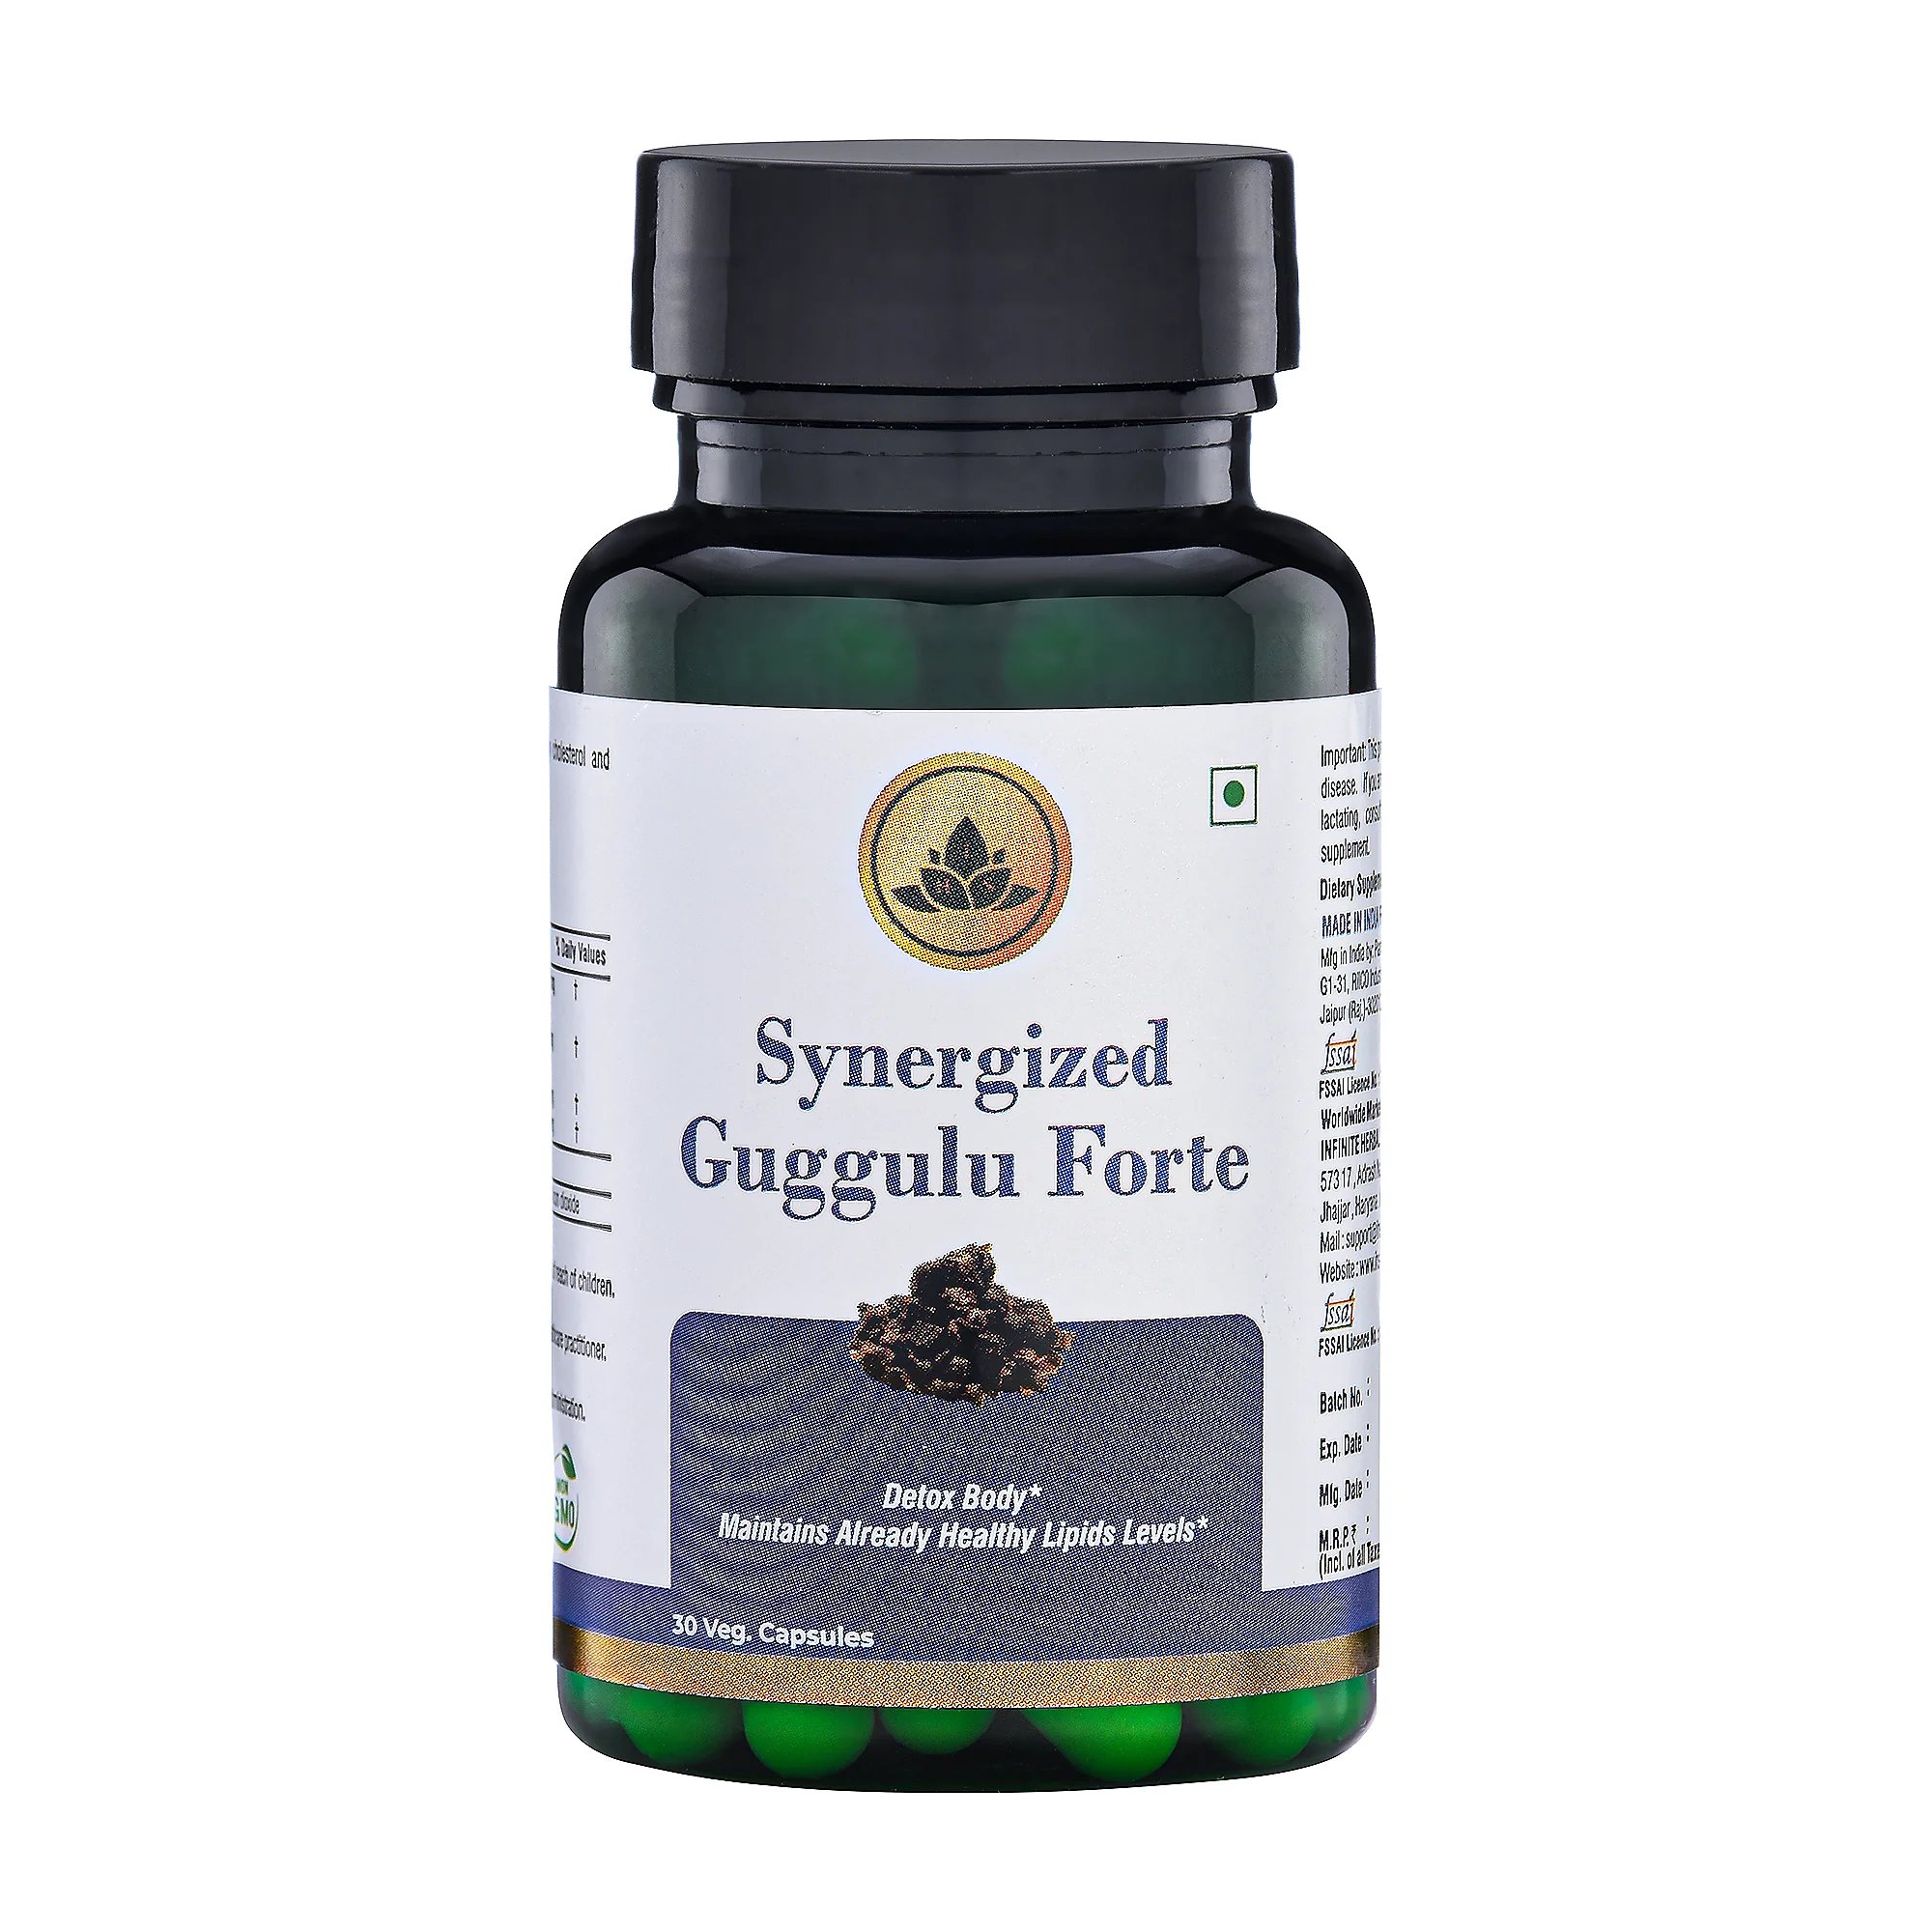 Synergized Guggulu Forte Herbs For Fat Loss